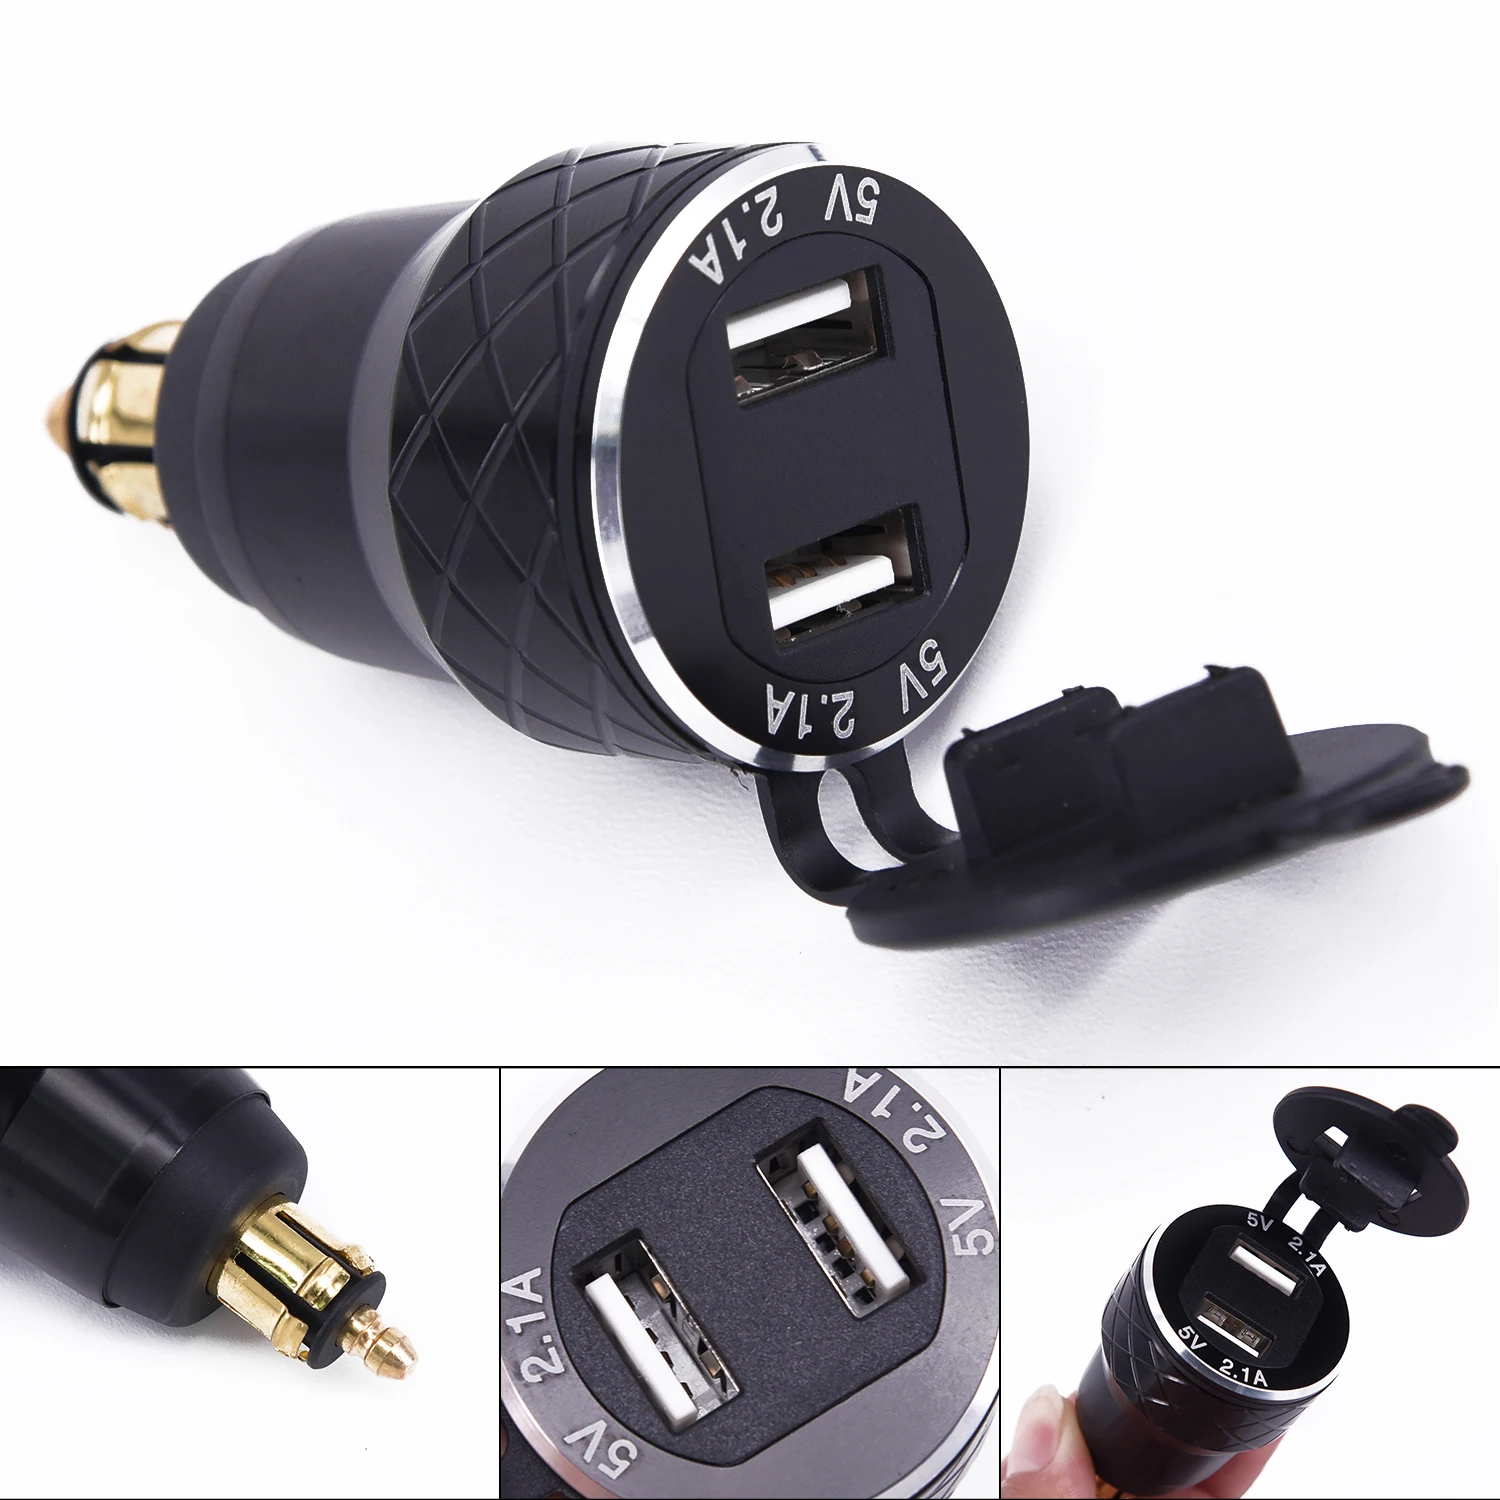 1pc Black Brand New And High Quality Aluminum Alloy Shell metal CNC Dual USB Charger For BMW Motorcycle Cigarette Lighter